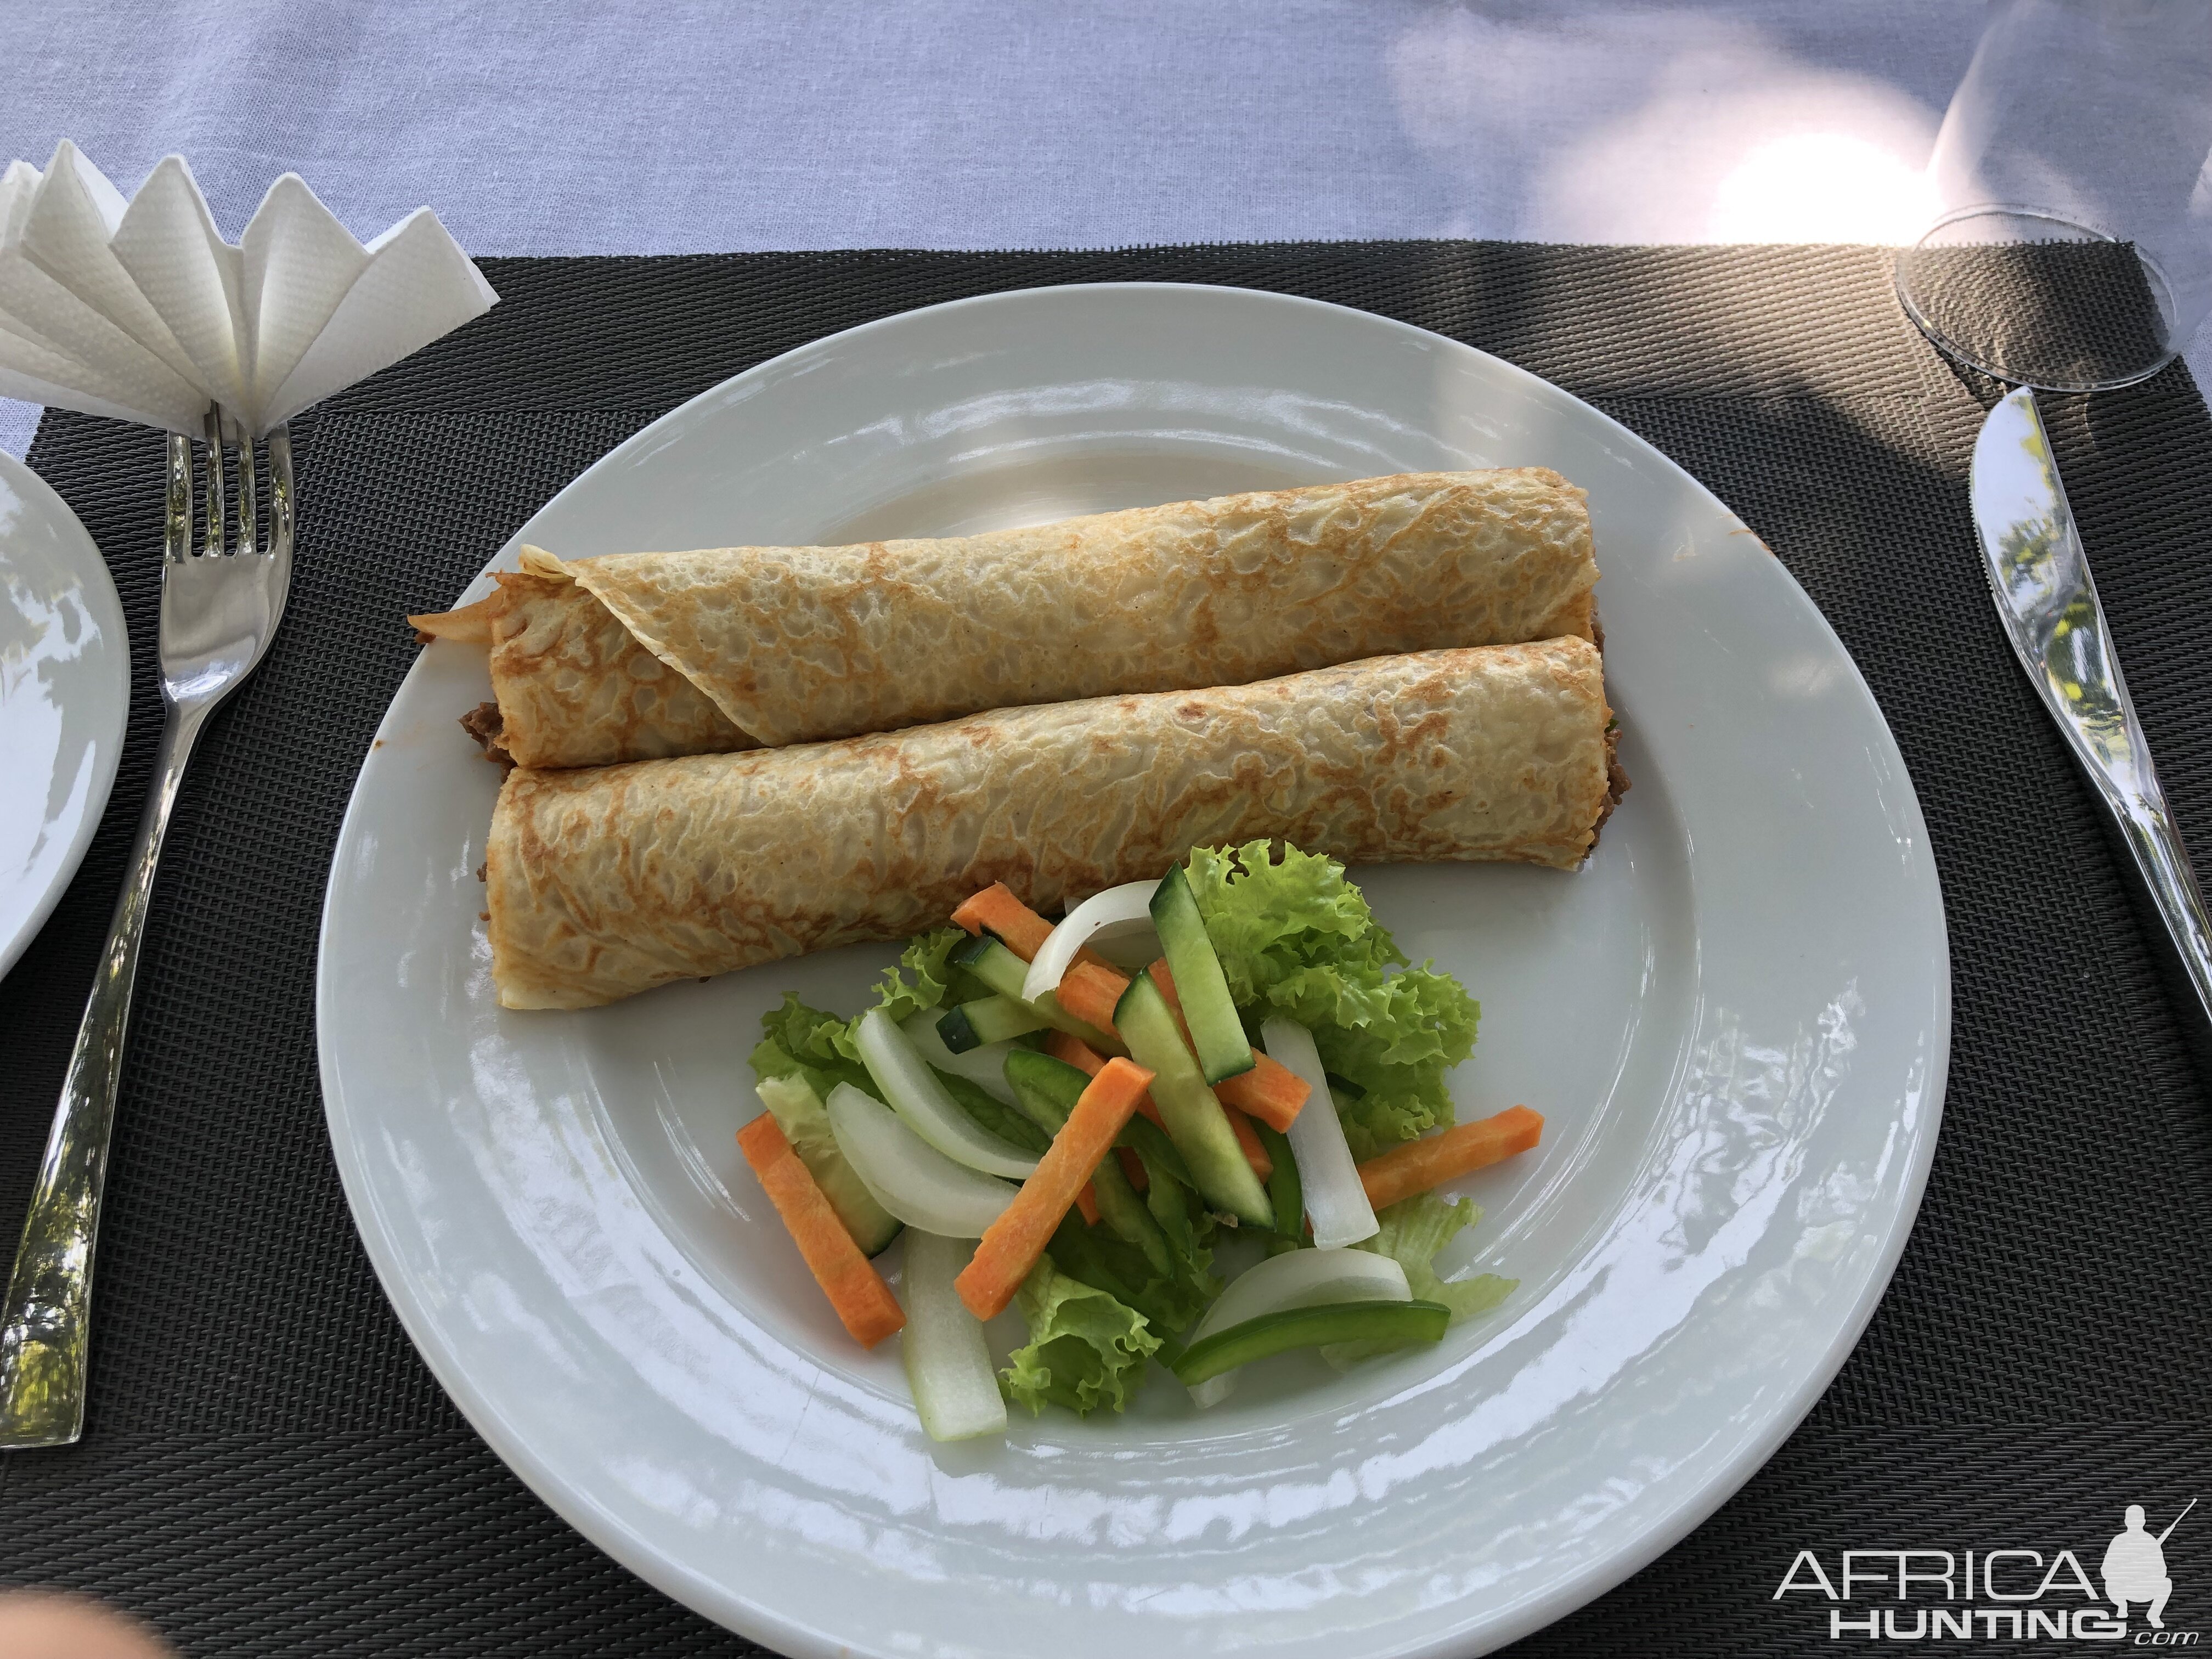 Impala meat sauce crepe with vegetables